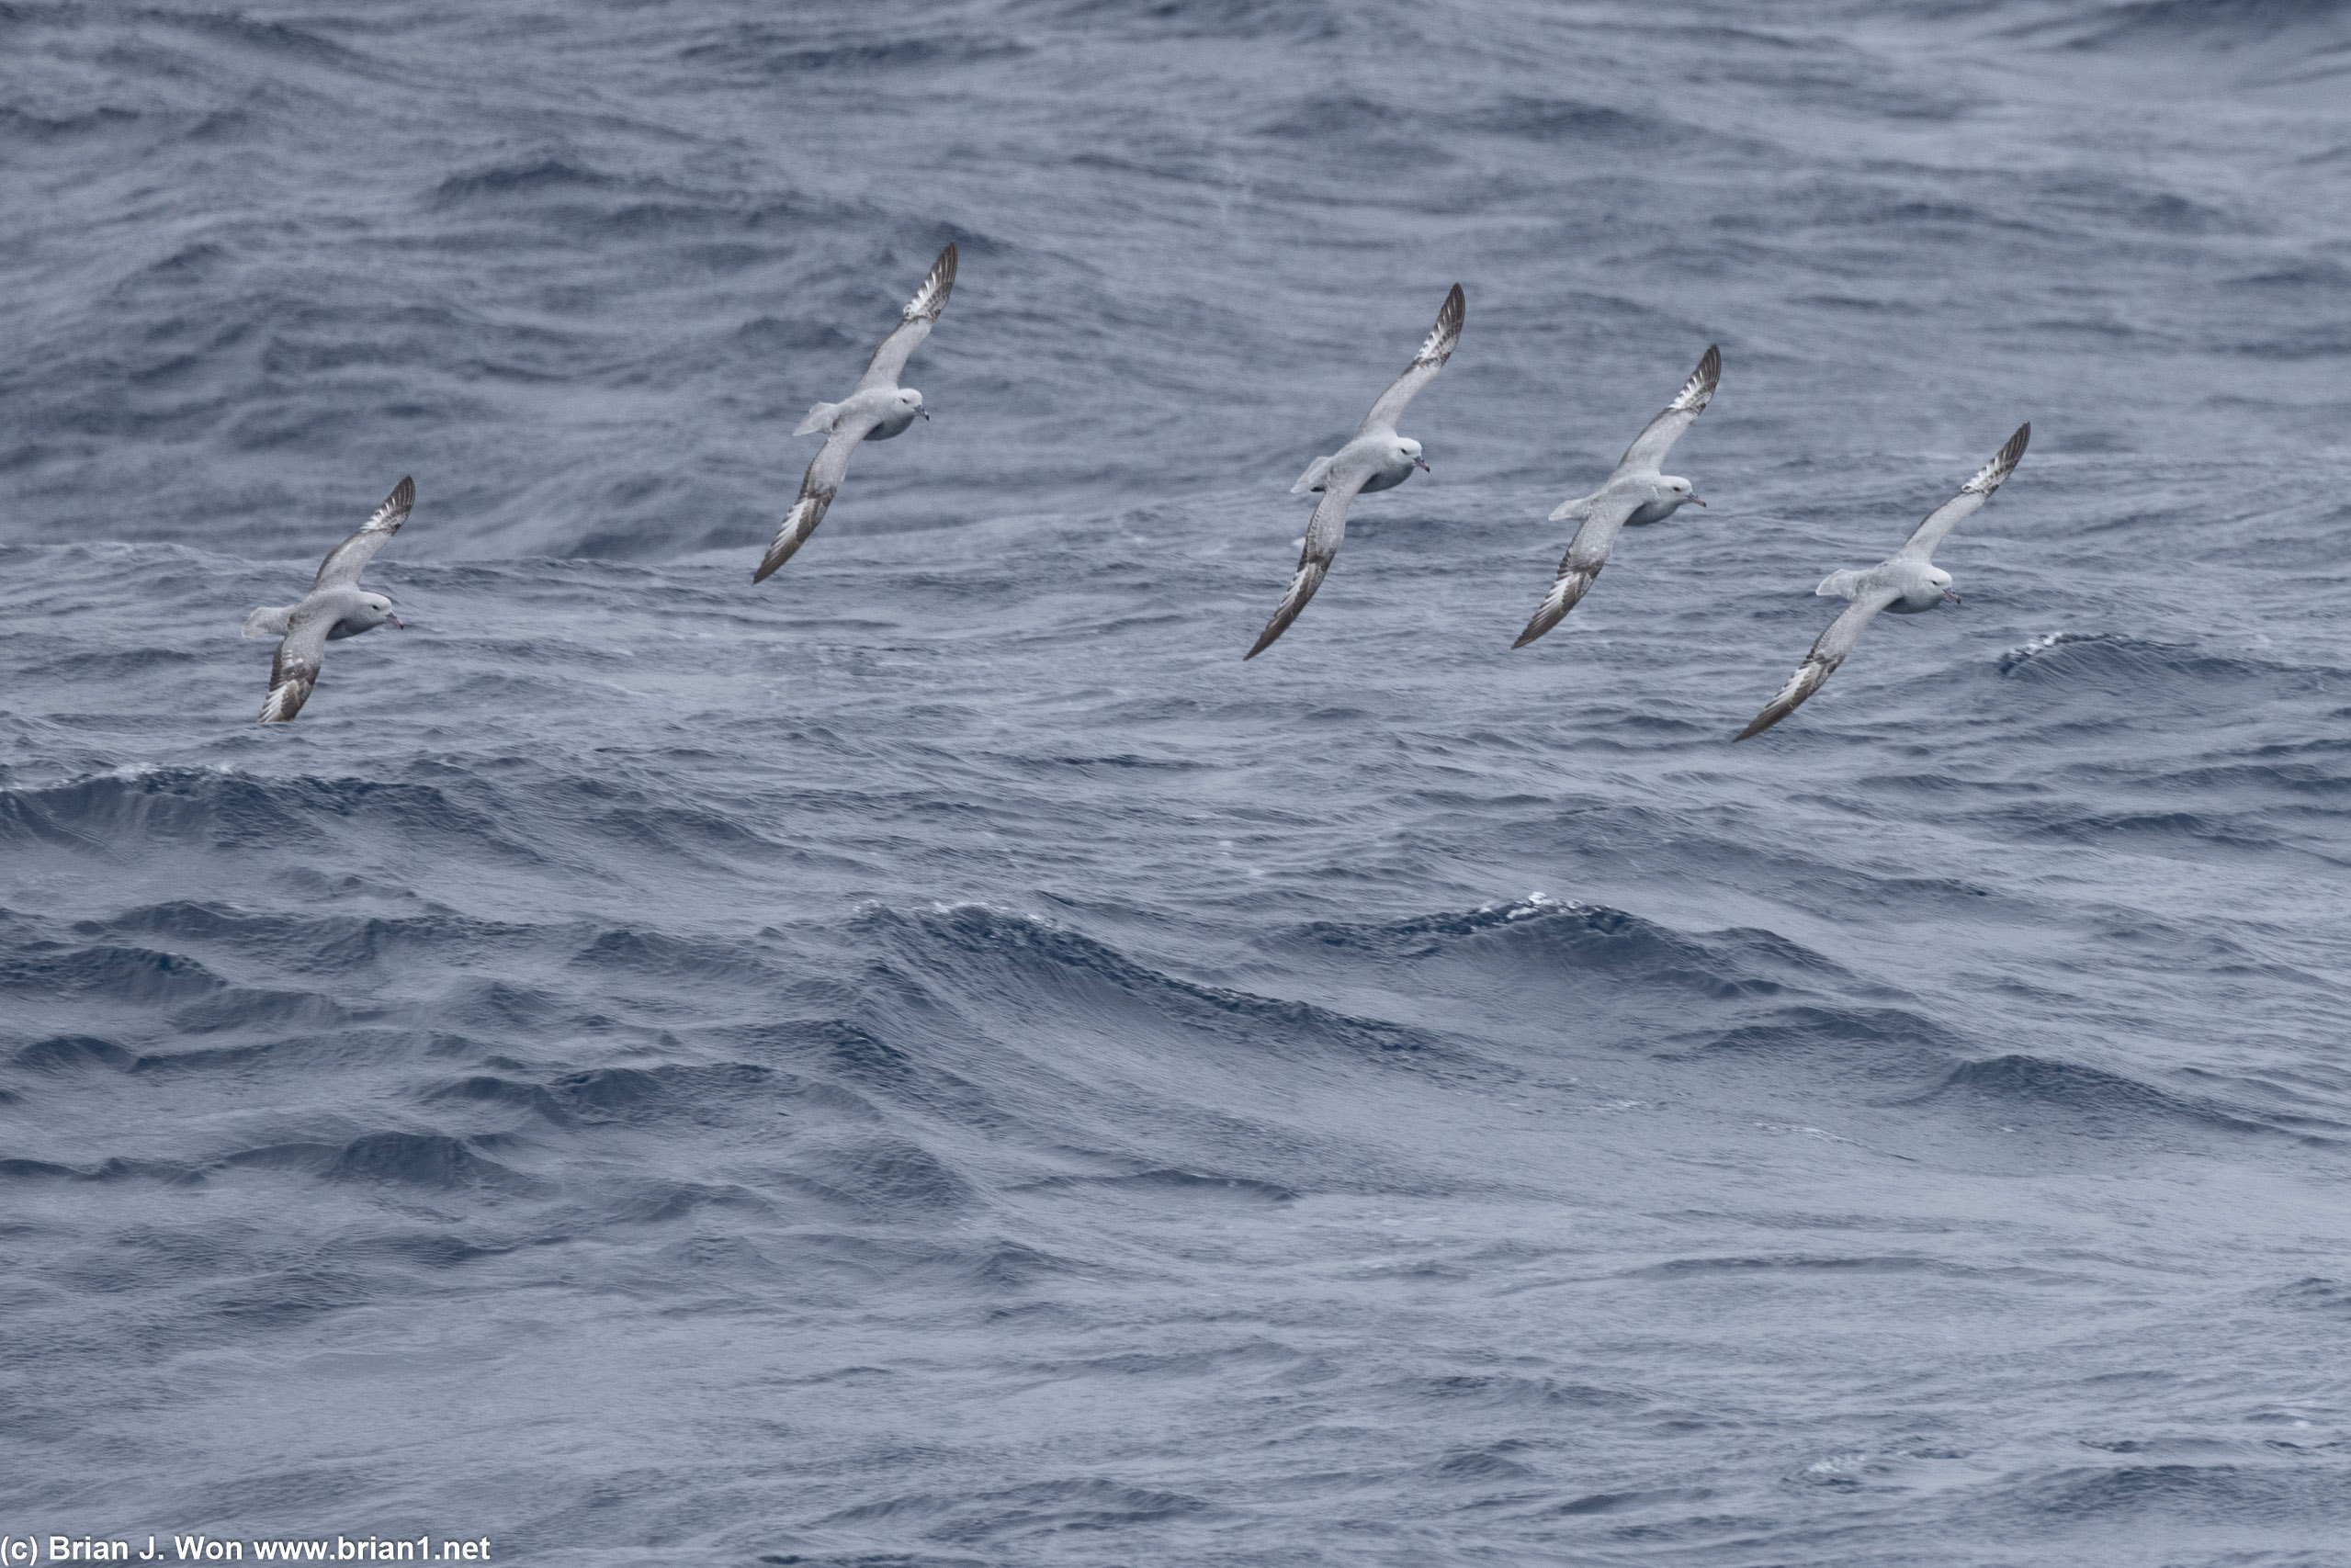 Southern fulmars flying in formation.